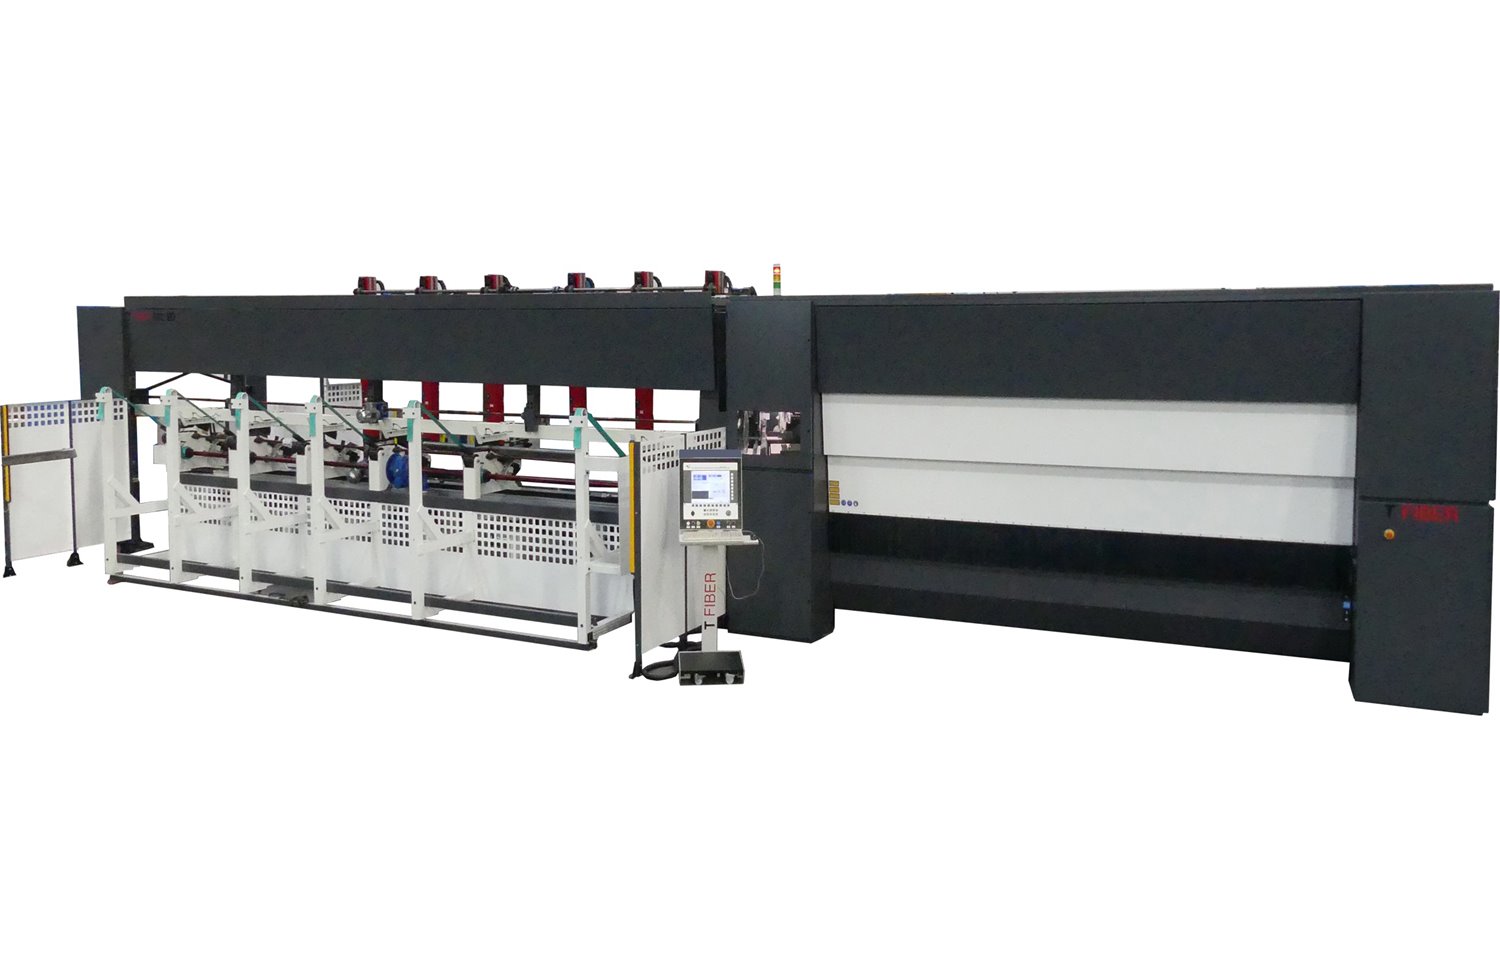    Laser Cutting Machines LCU  Tube Laser Processing System F&P New [#5066] 